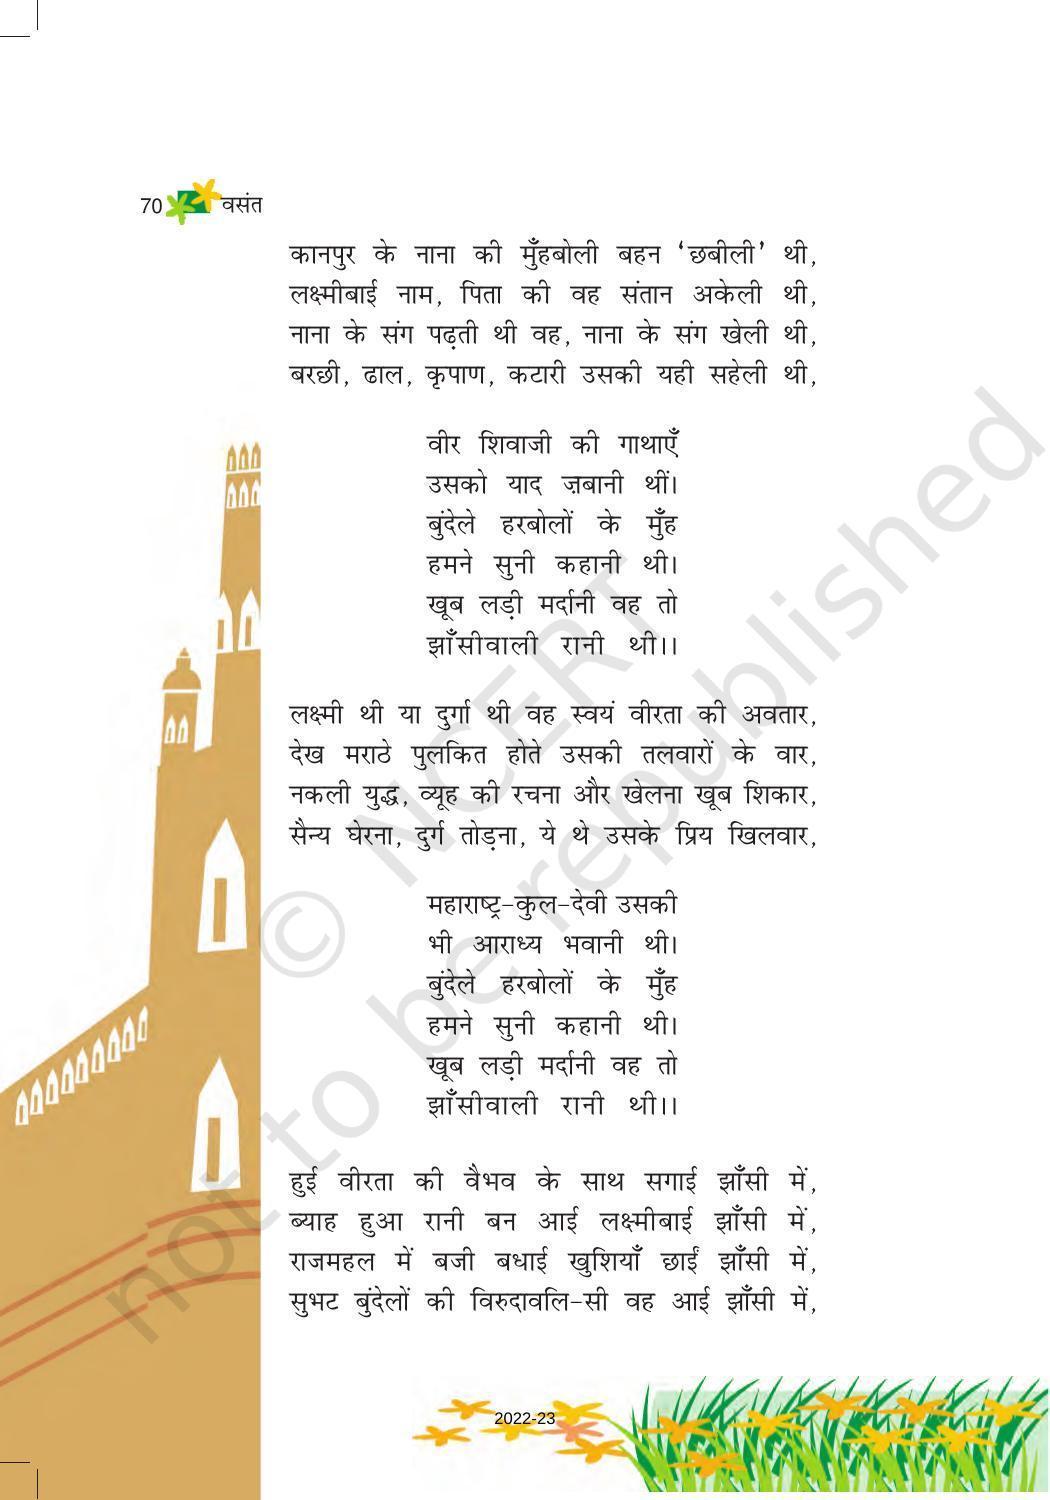 NCERT Book for Class 6 Hindi(Vasant Bhag 1) : Chapter 10-झांसी की रानी - Page 2